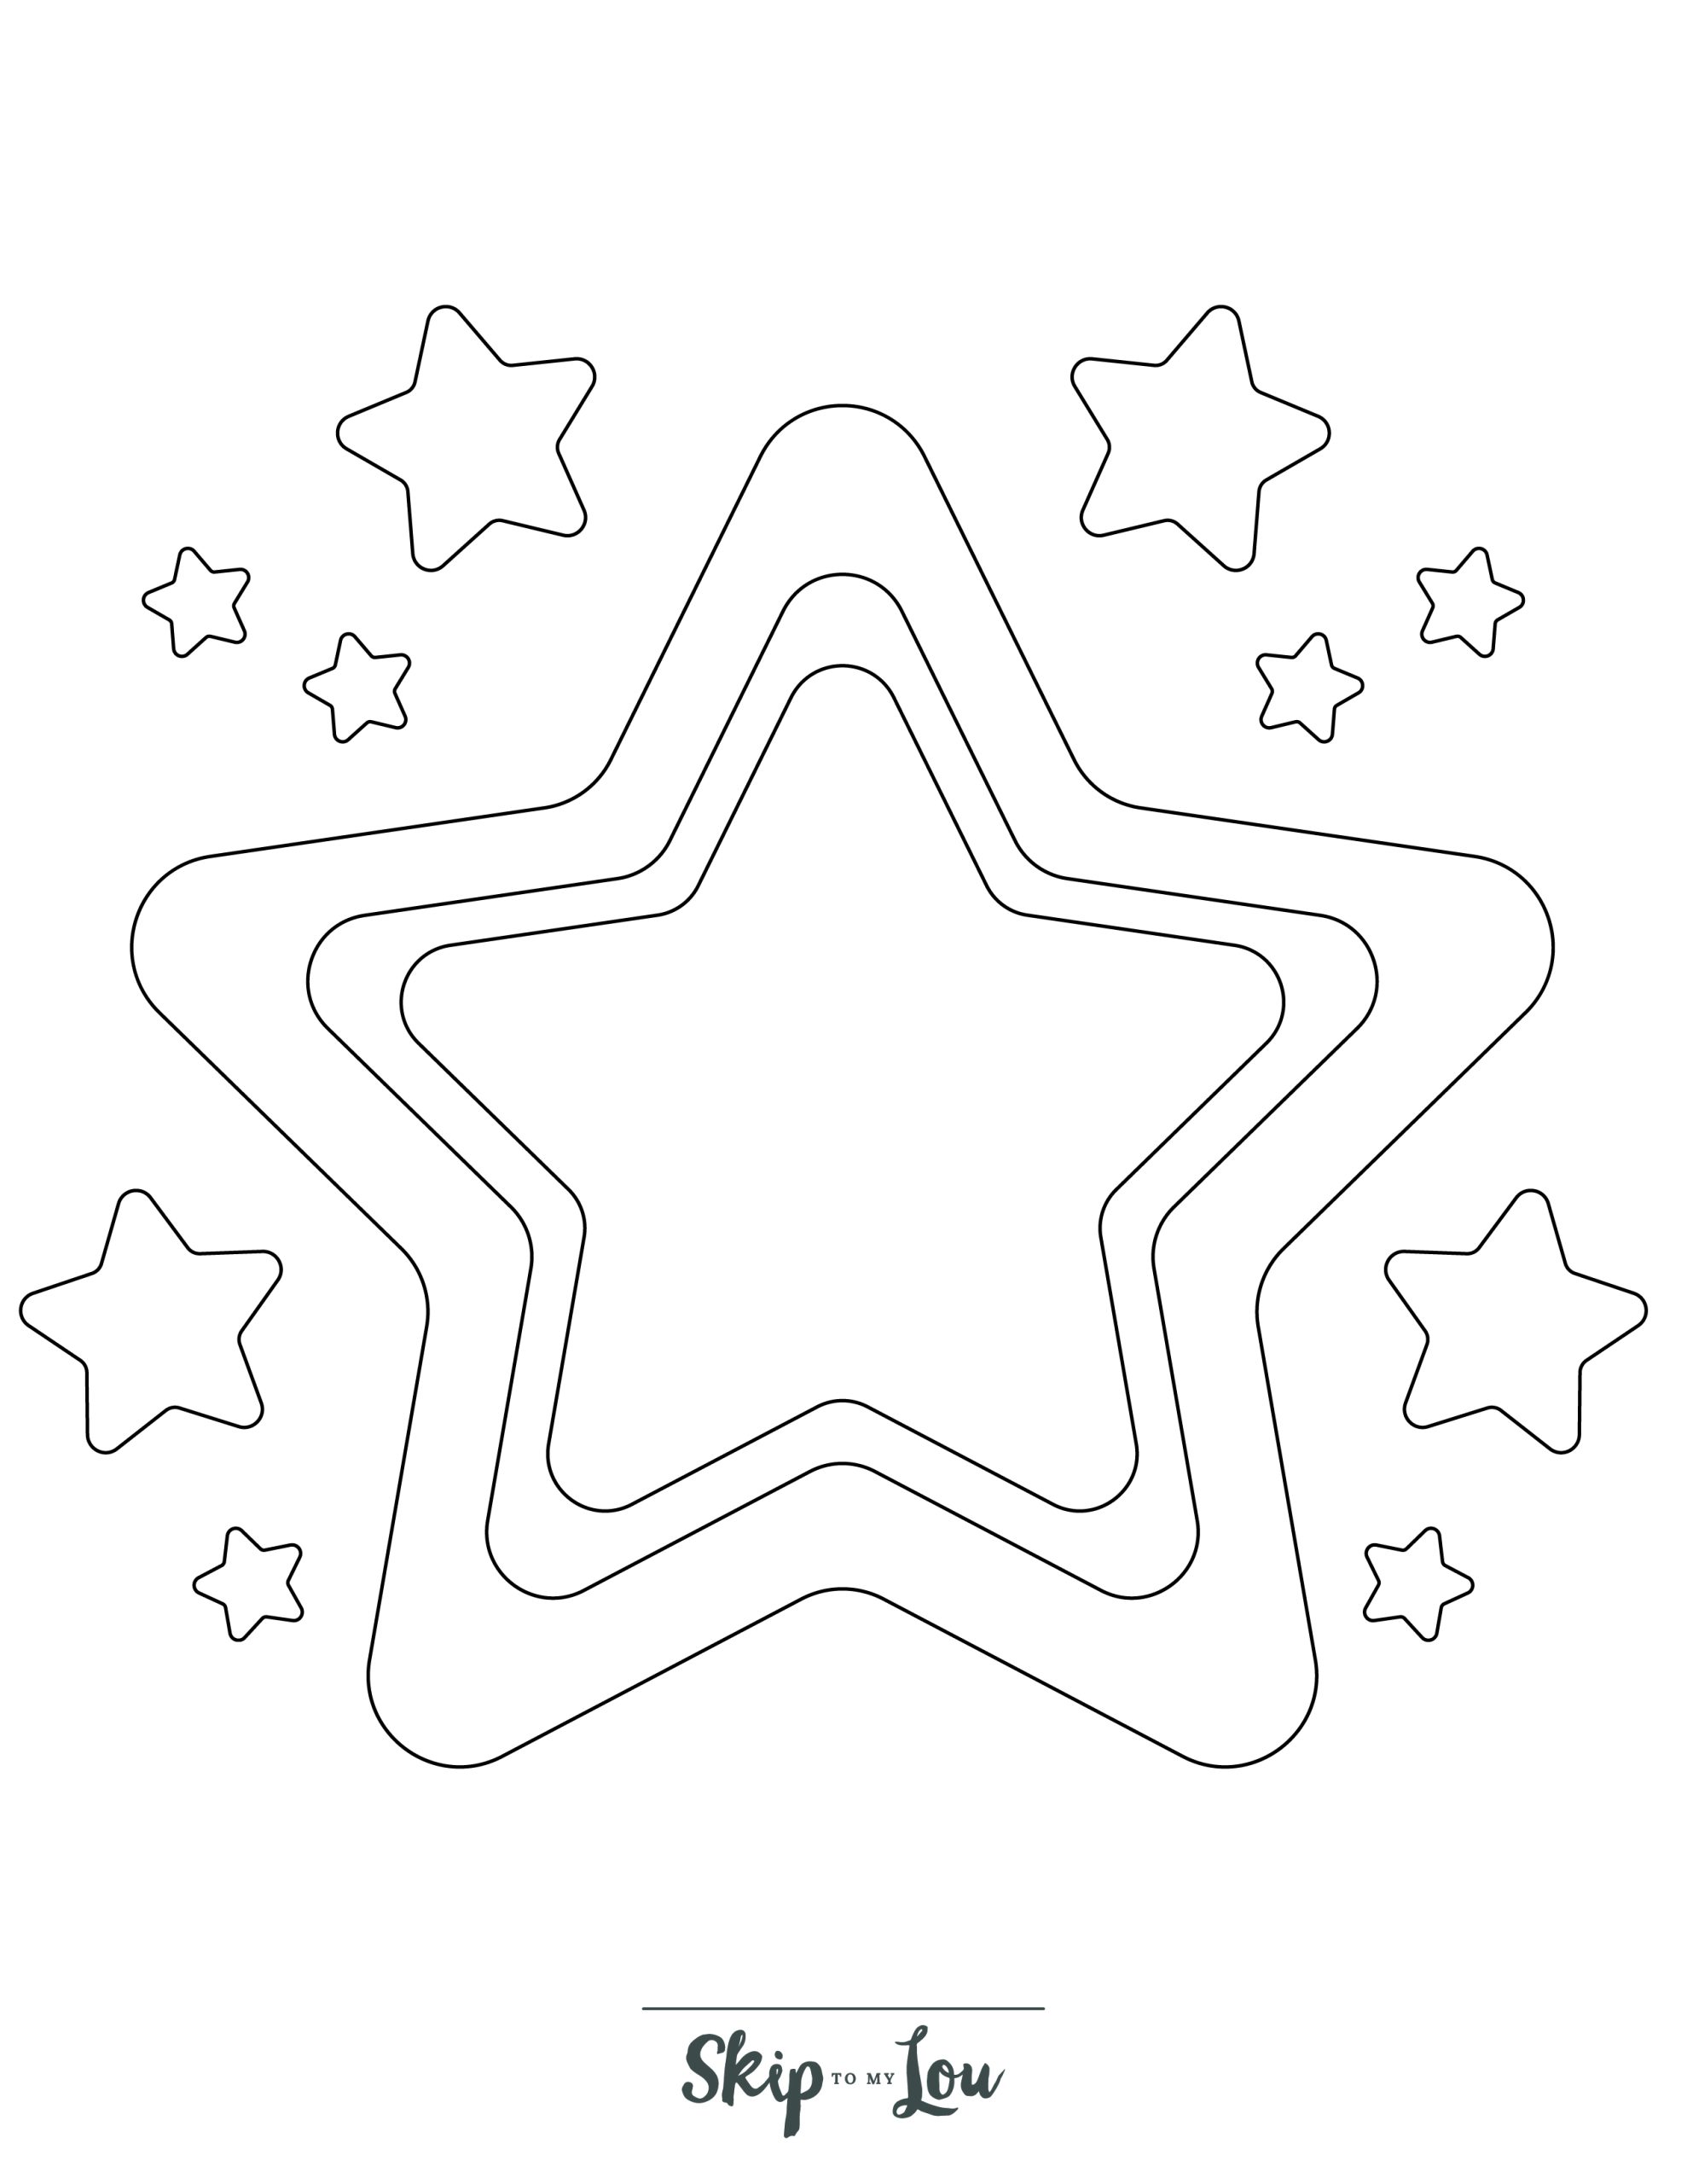 Star Coloring Page 1 - Line drawing of a big star surrounded by smaller stars